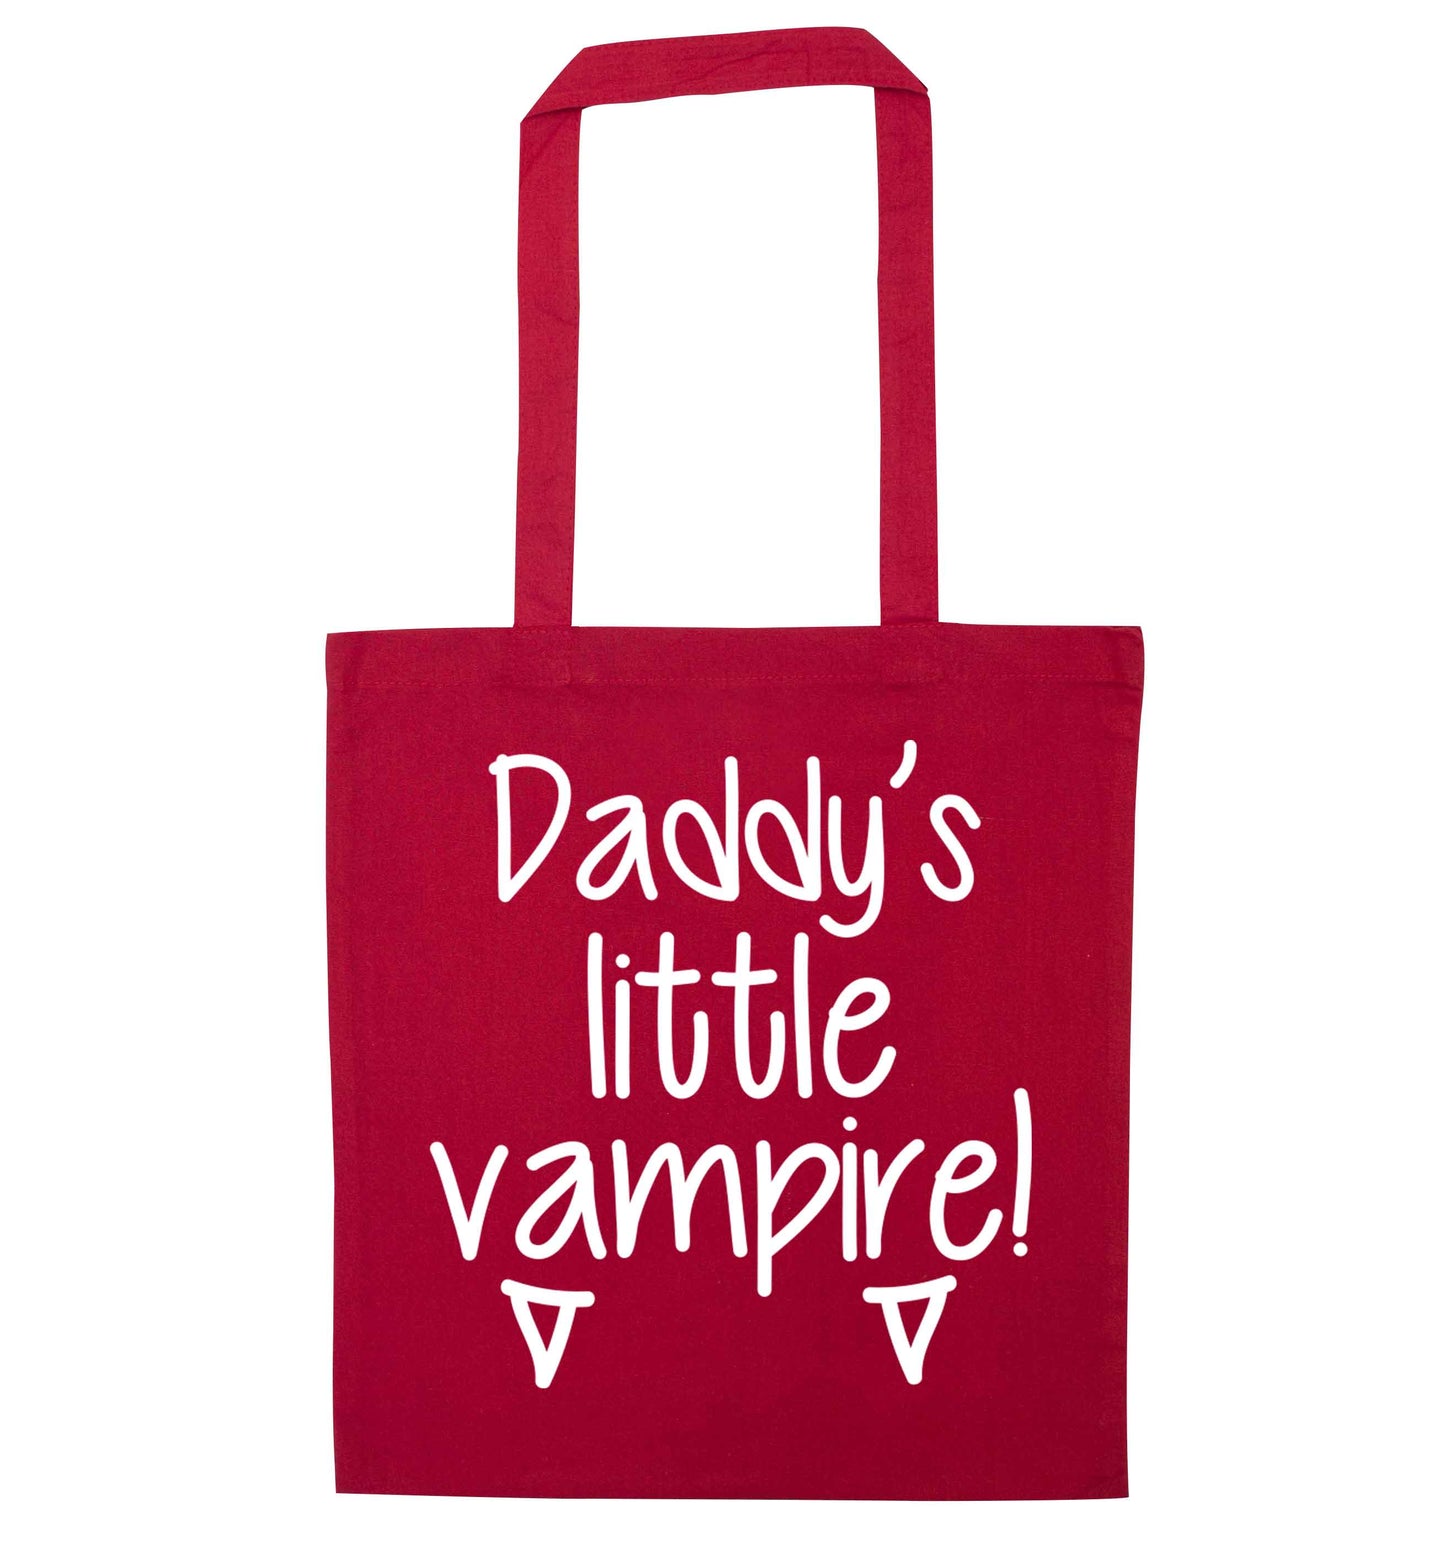 Daddy's little vampire red tote bag